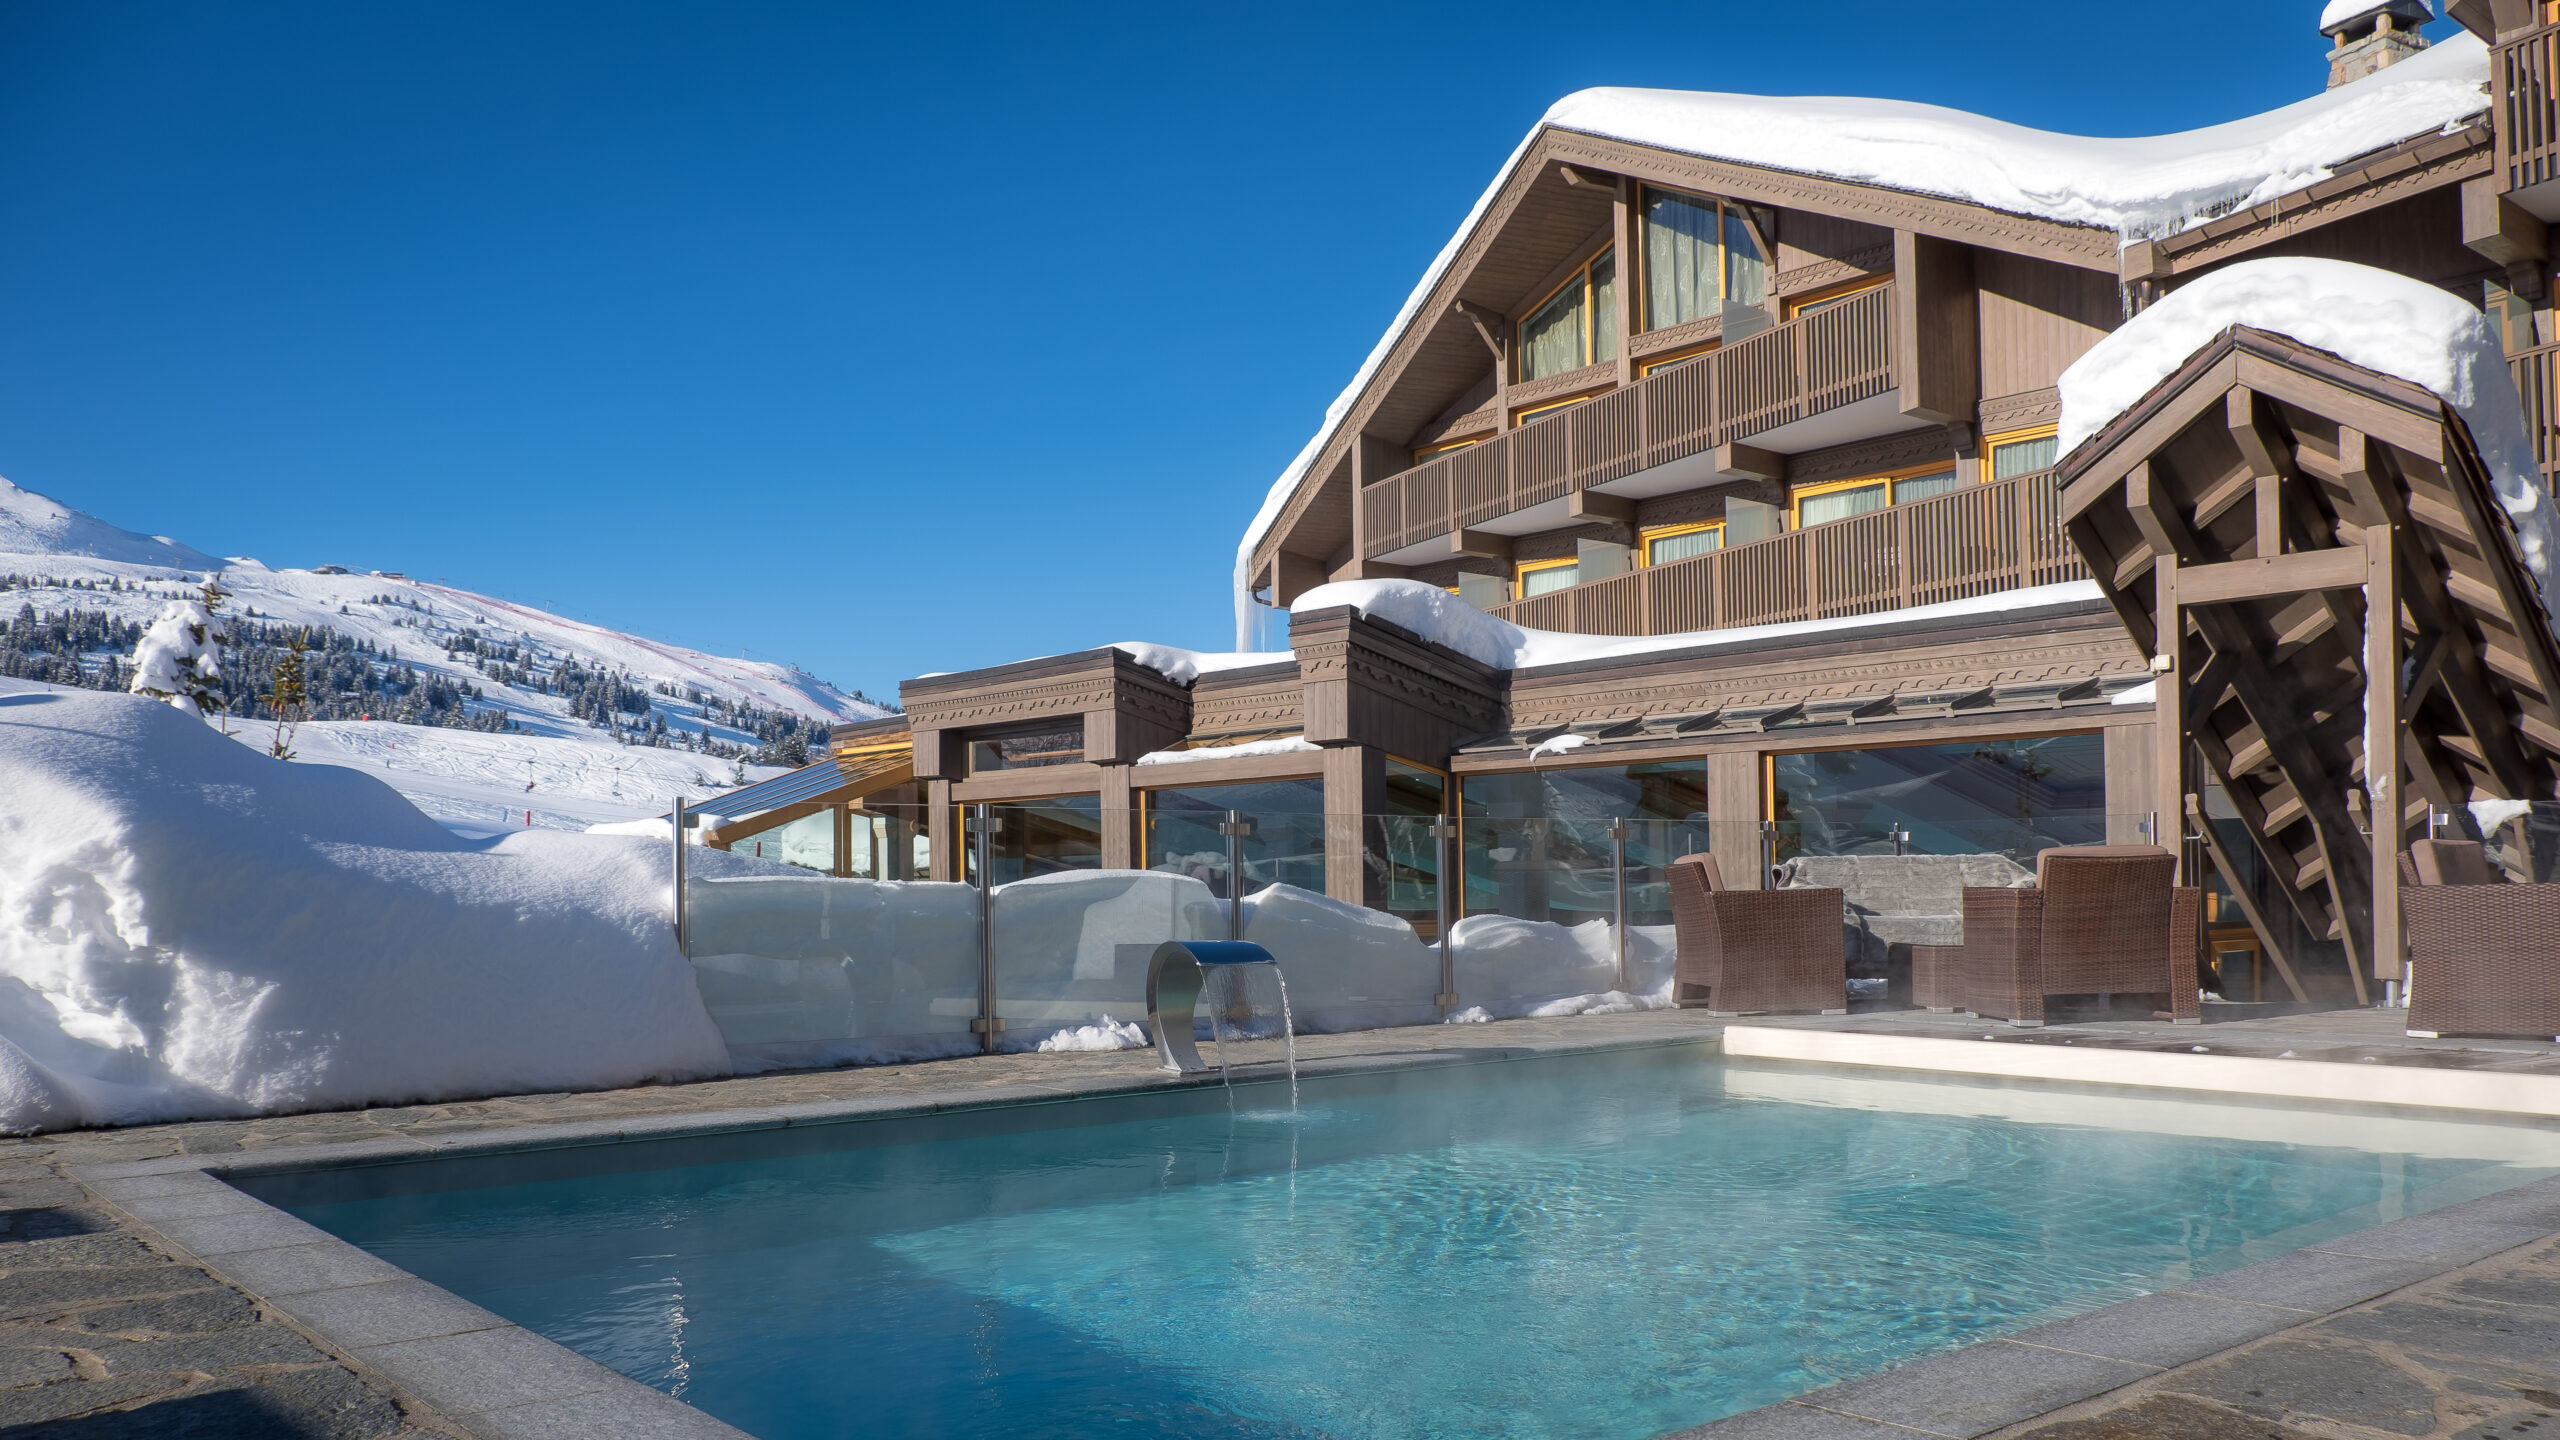 About our handpicked hotels across the Alps